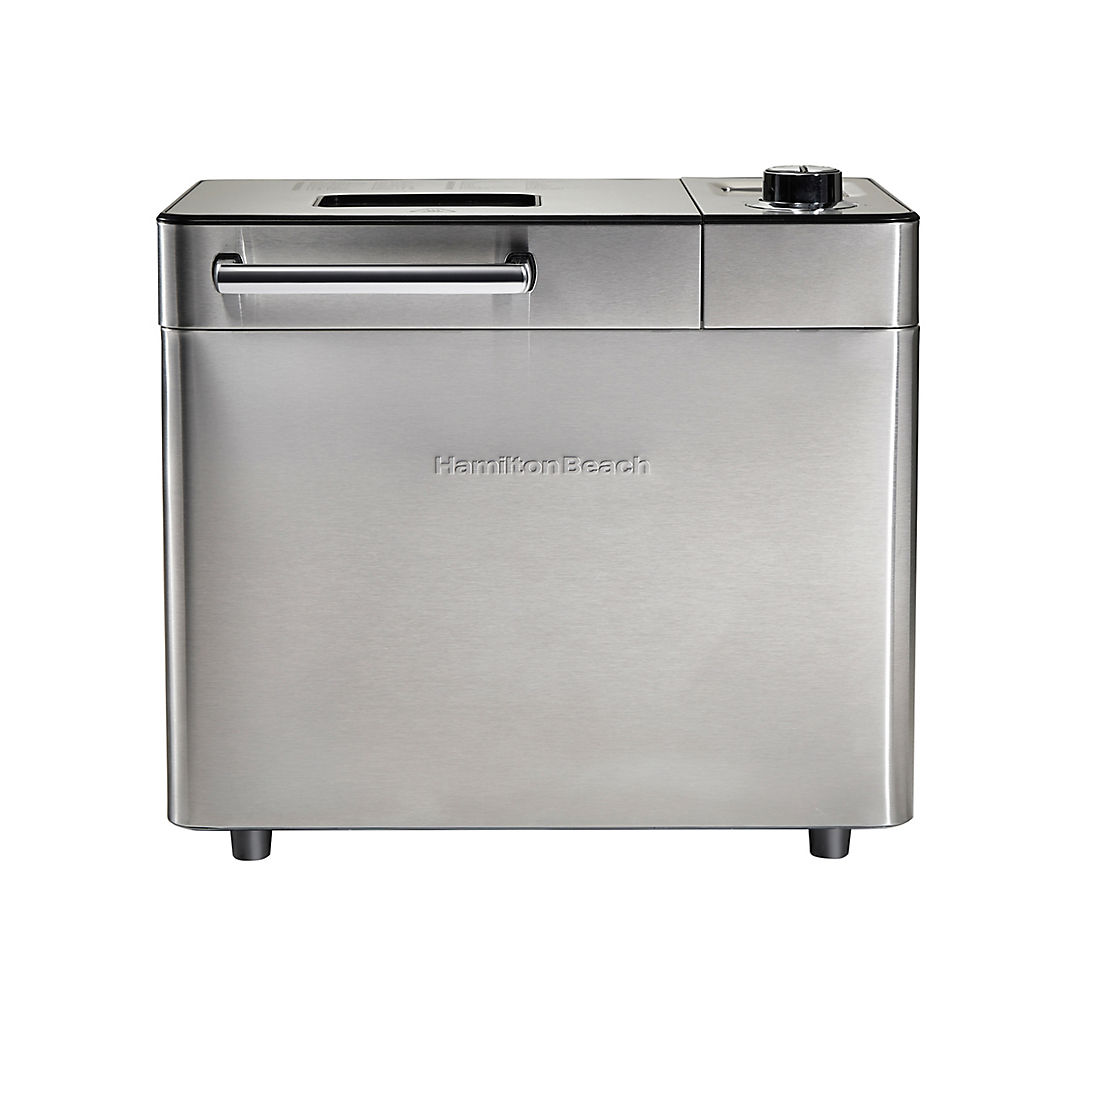 Frigidaire Stainless Steel Automatic Bread Maker for sale online